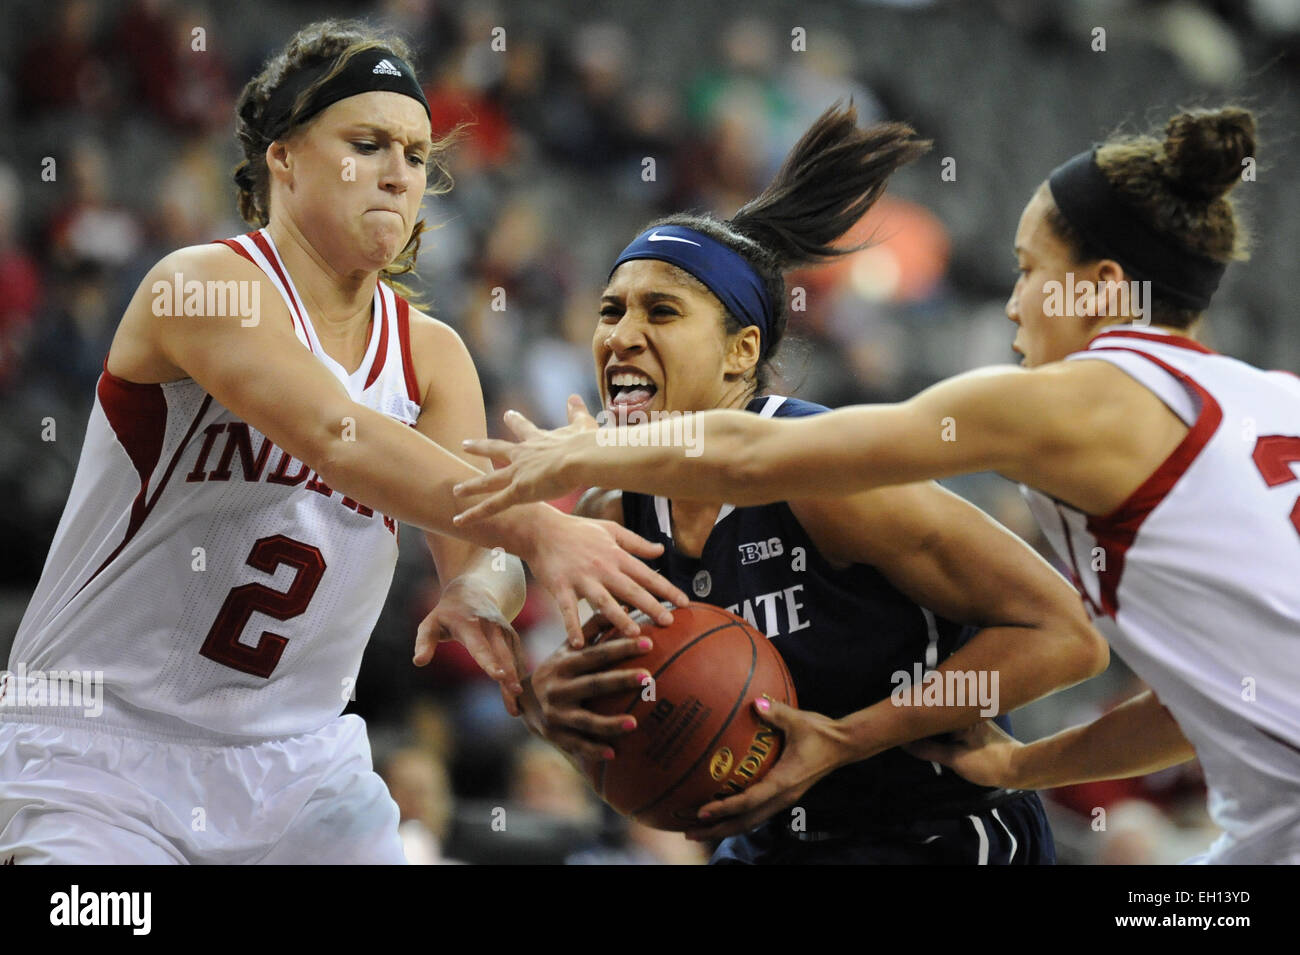 Indiana's guard Alexis Gassion (23) at the Louis Brown Athletic